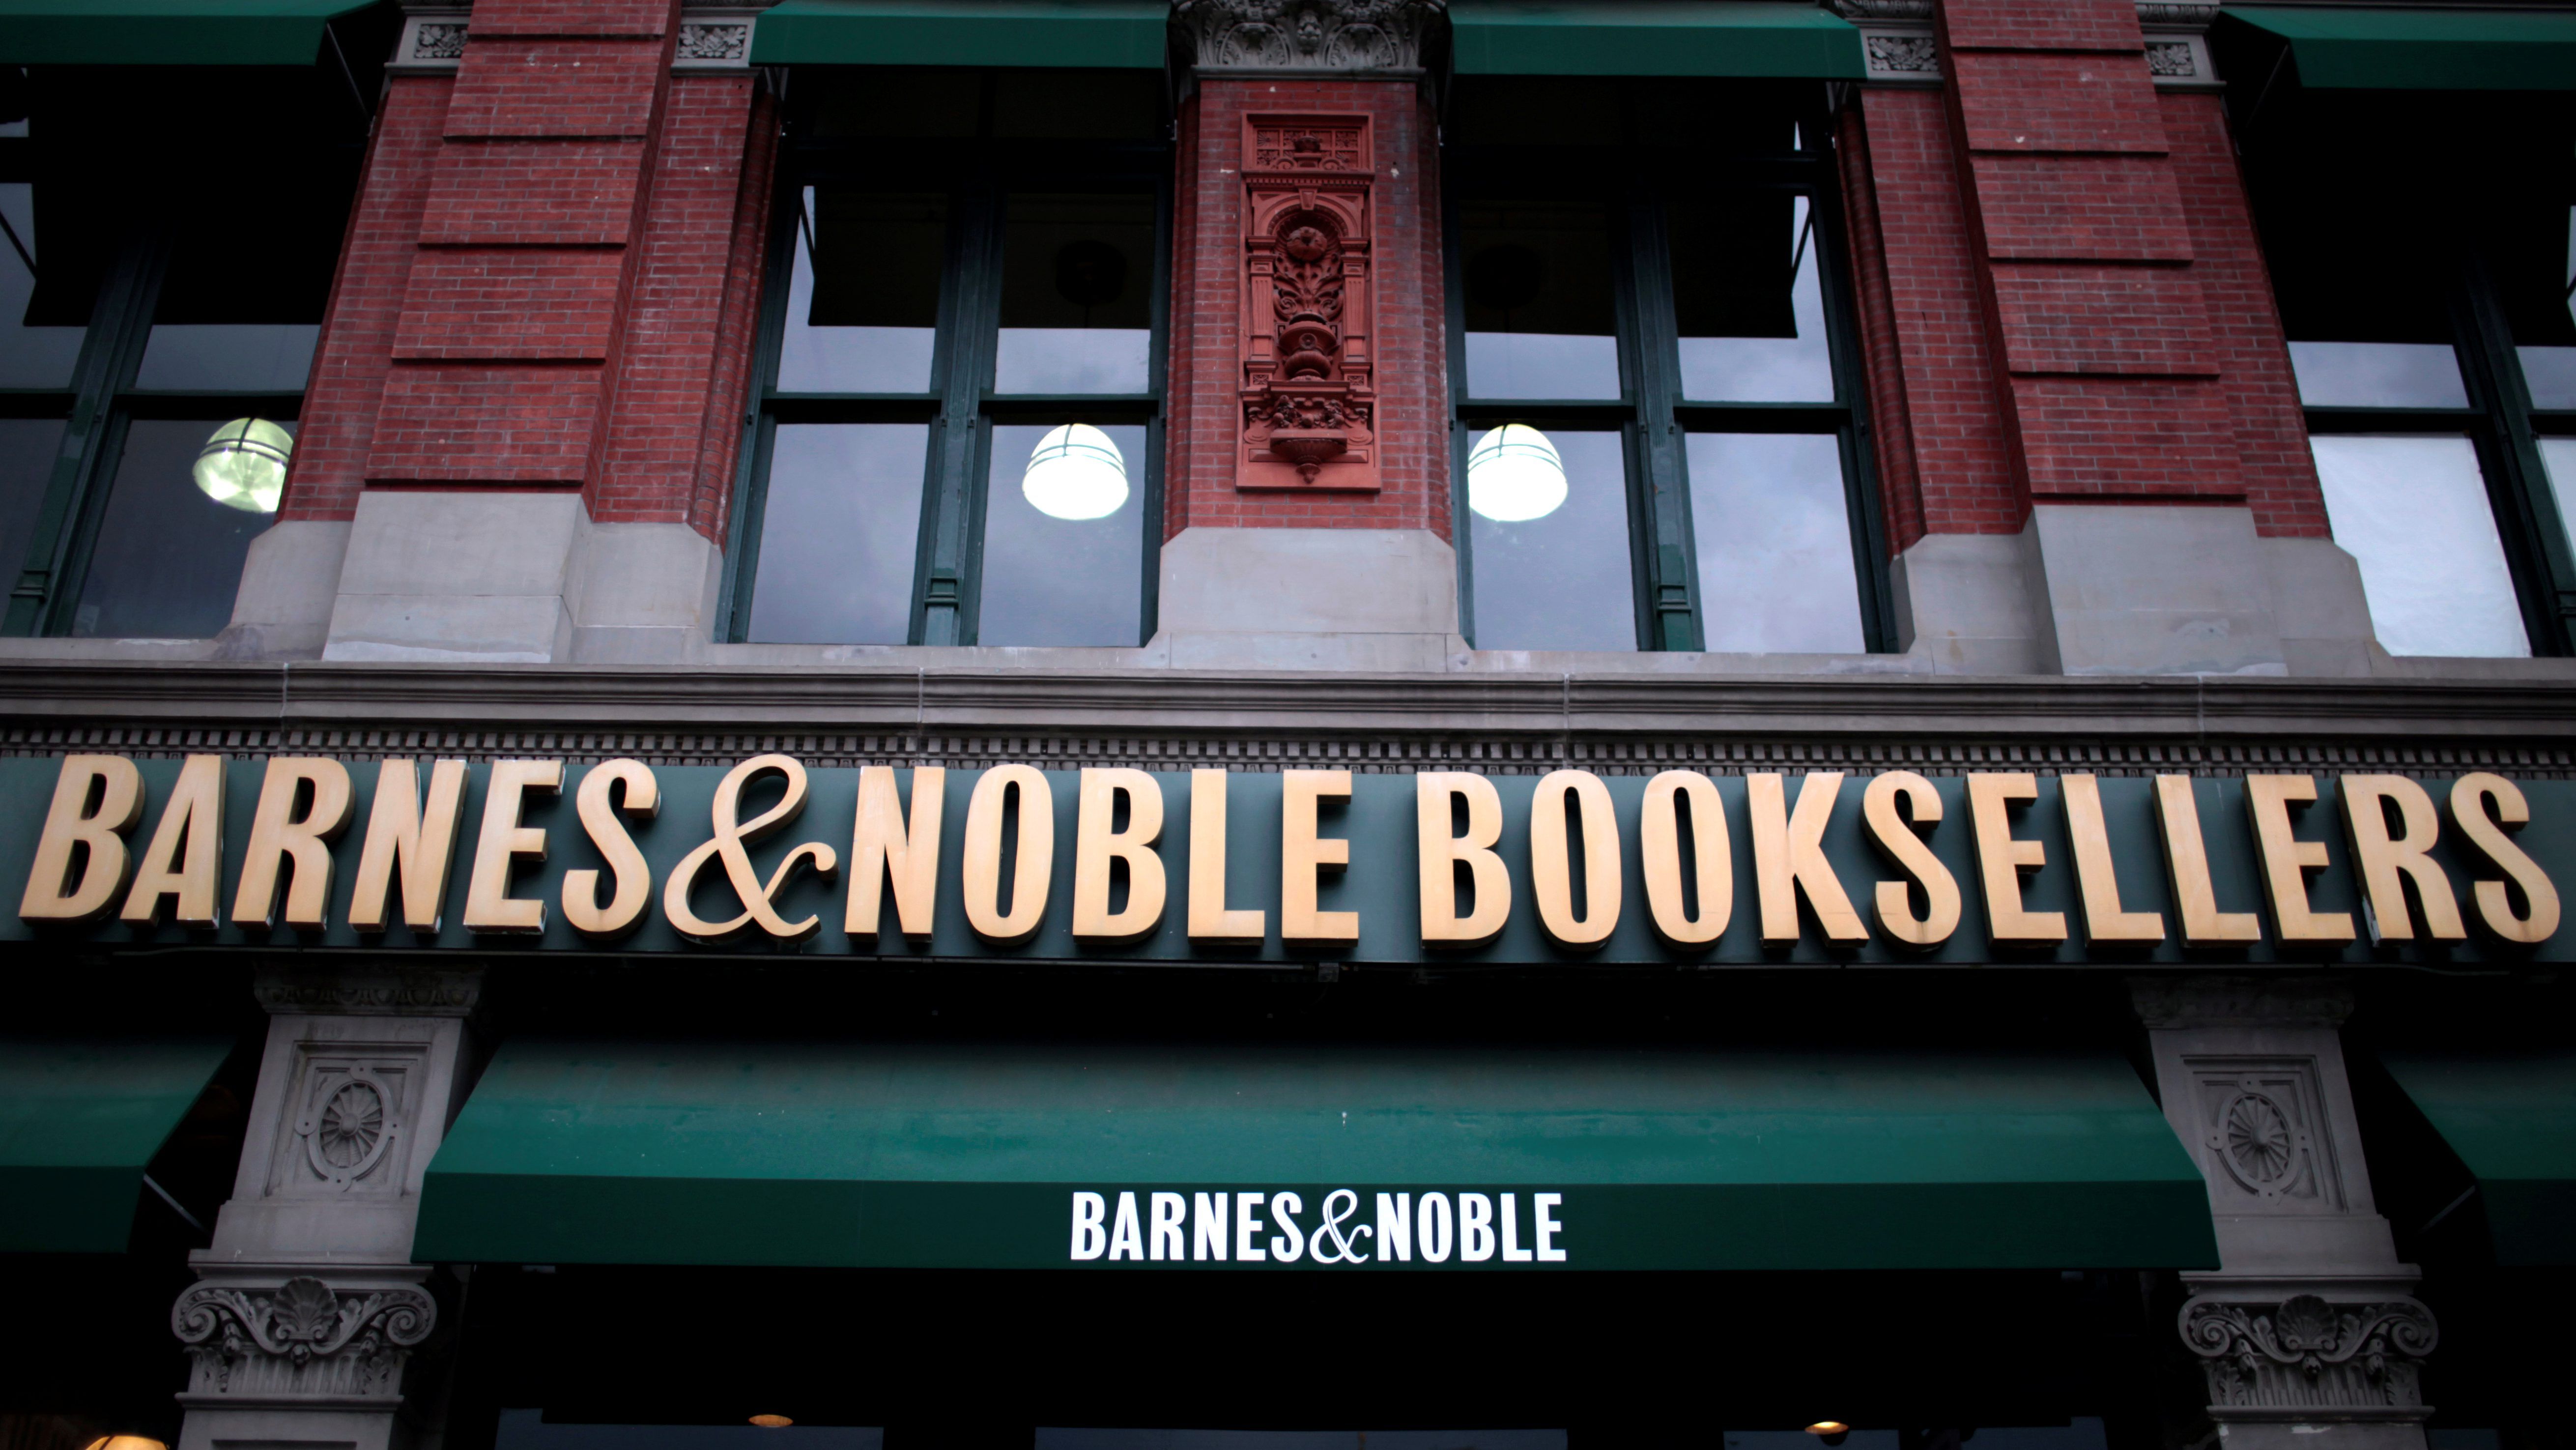  Barnes  Noble  has a new plan  to reinvigorate sales Books  